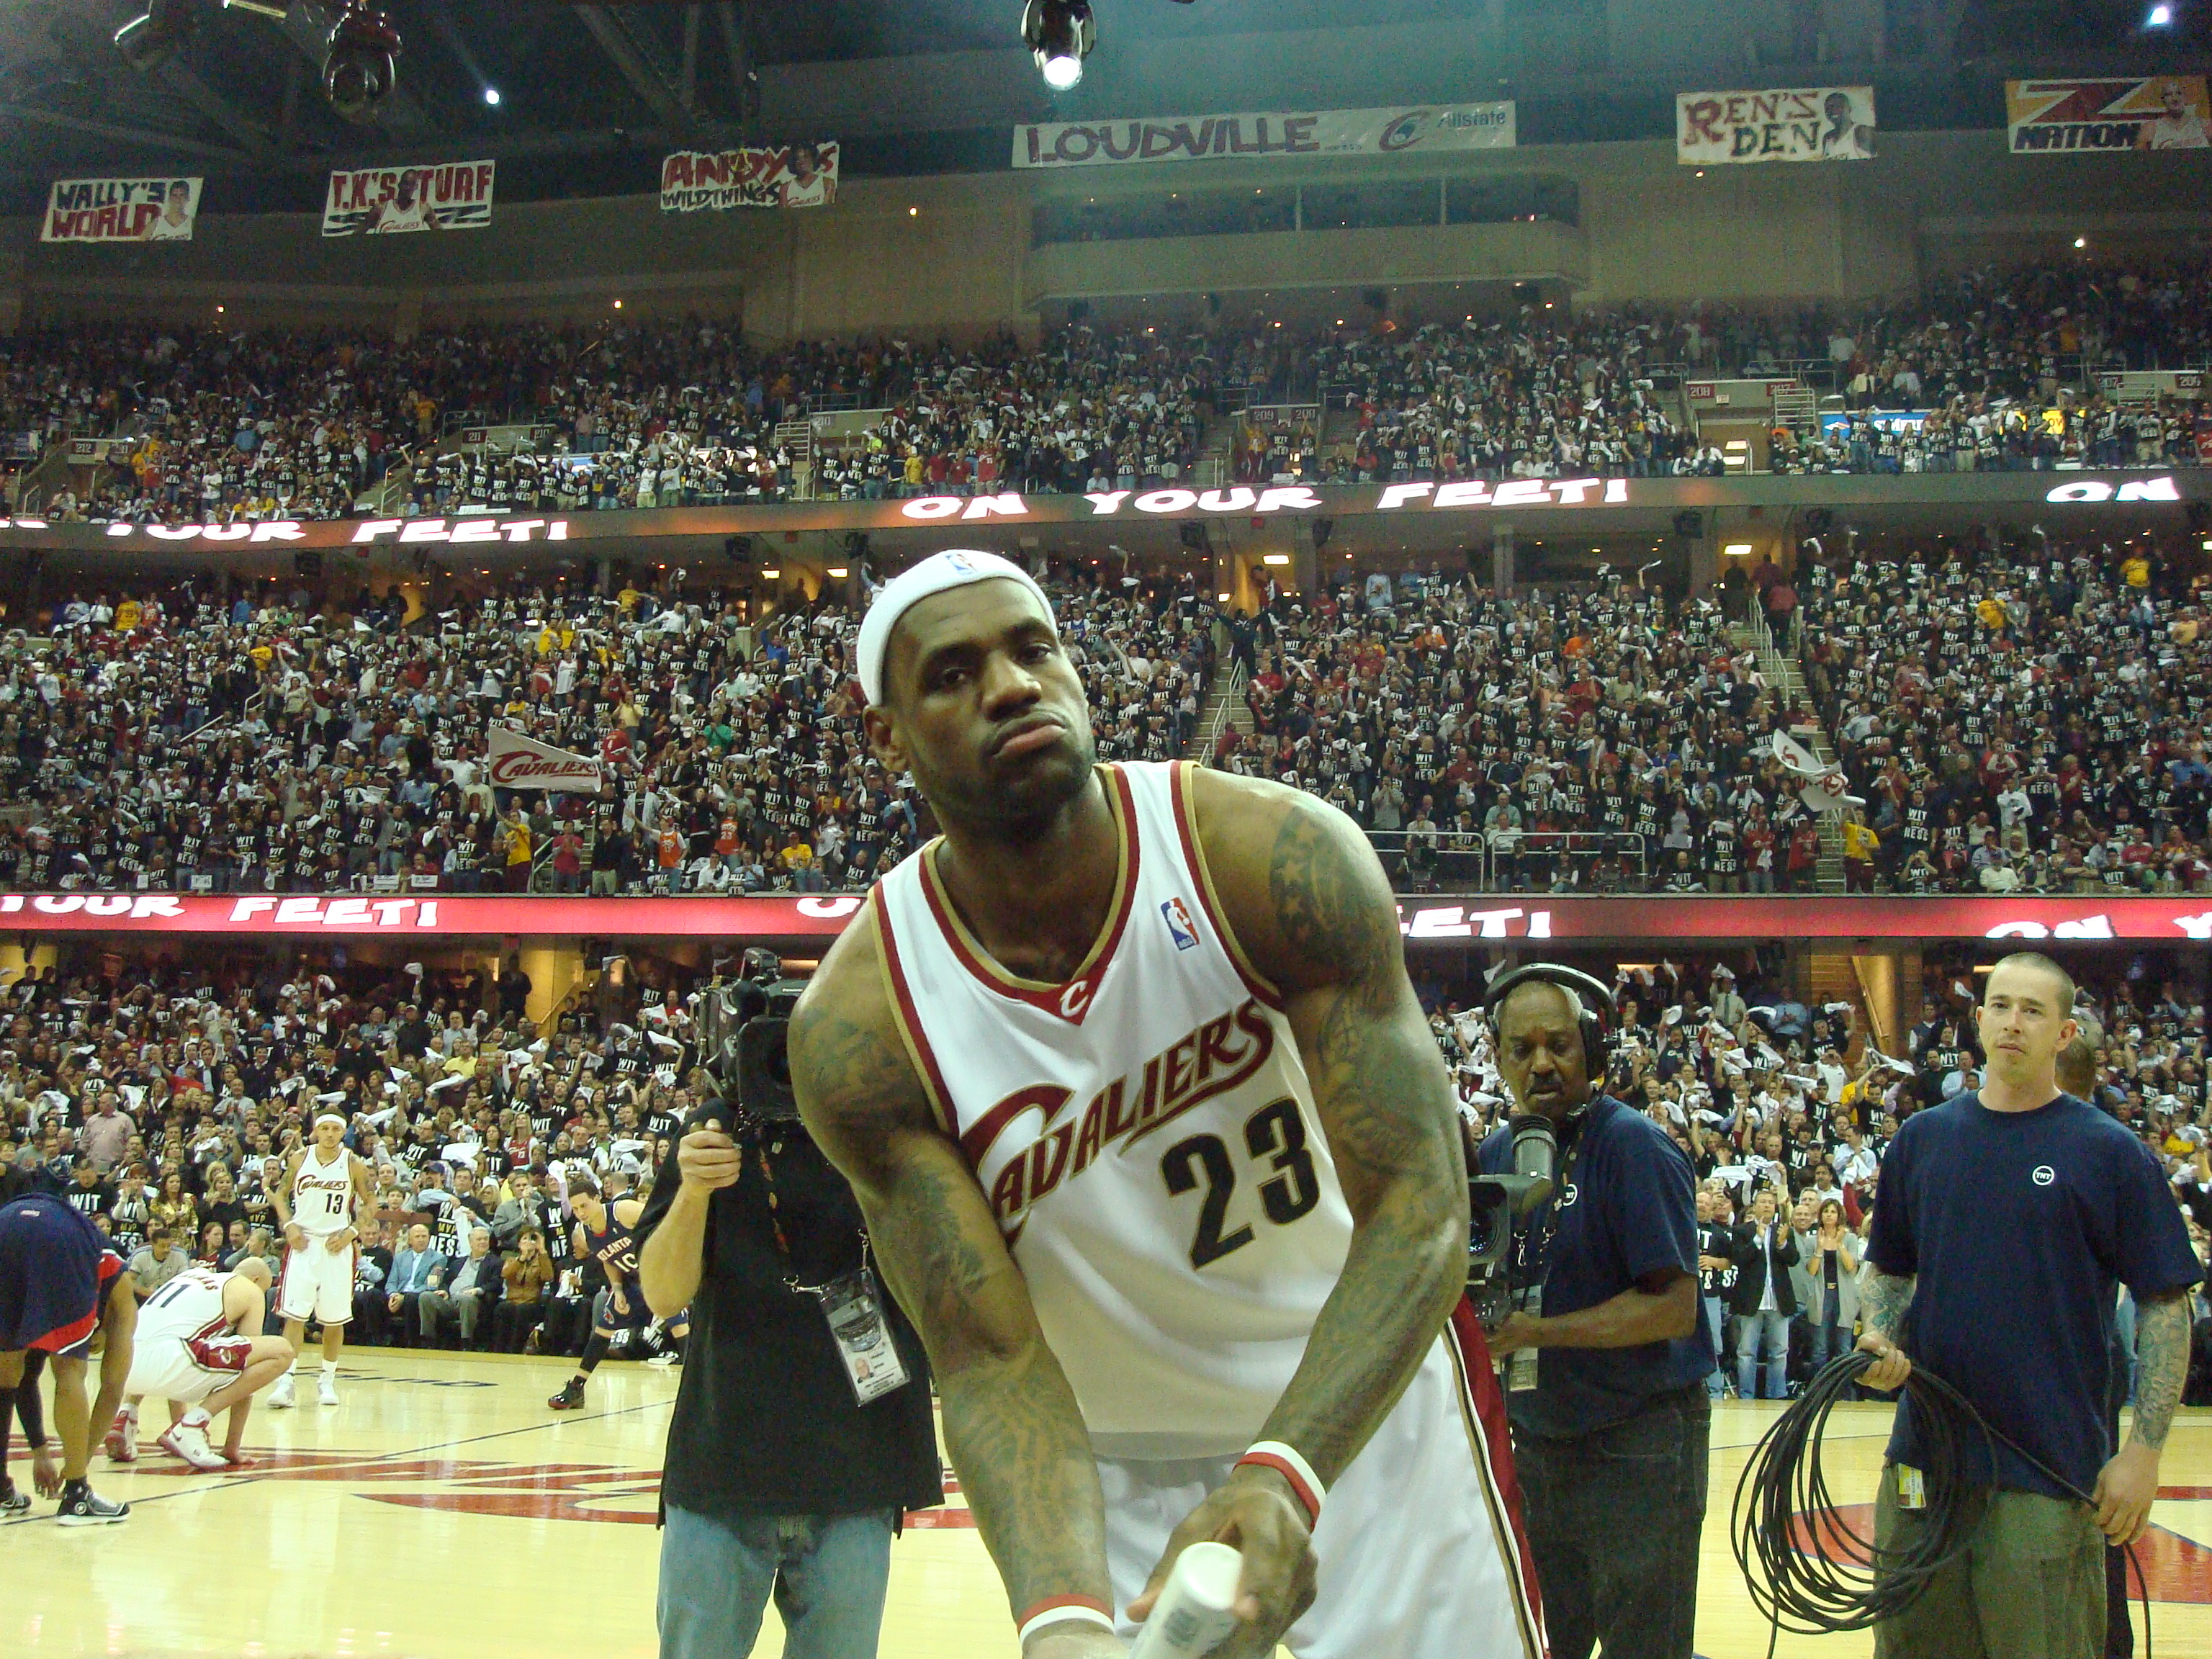 LeBron Getting Ready For Powder Toss